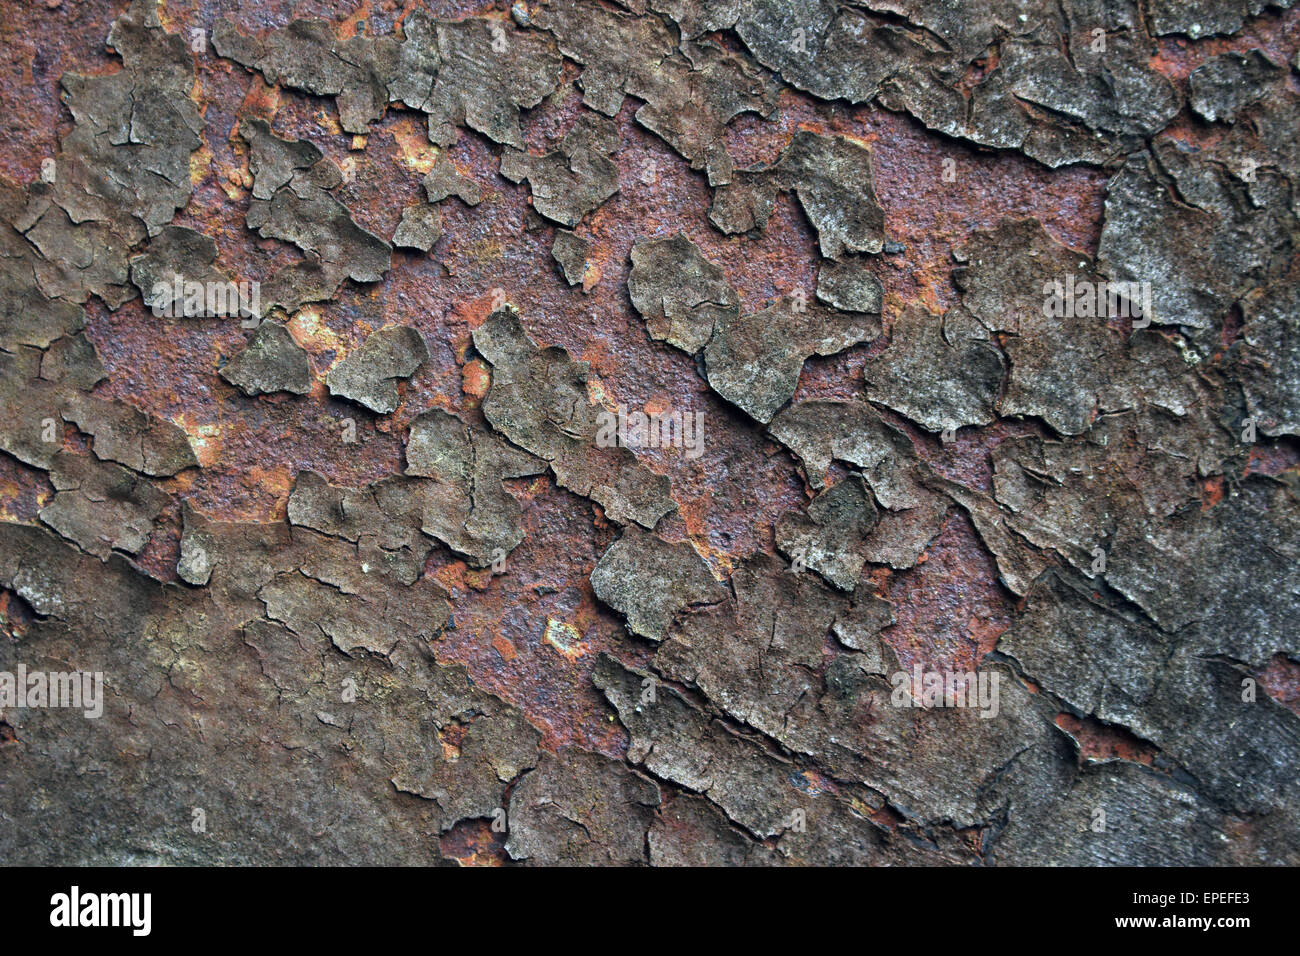 Rusting iron bridge near keswick in the lake district. close up showing corrosion and paint peeling texture Stock Photo